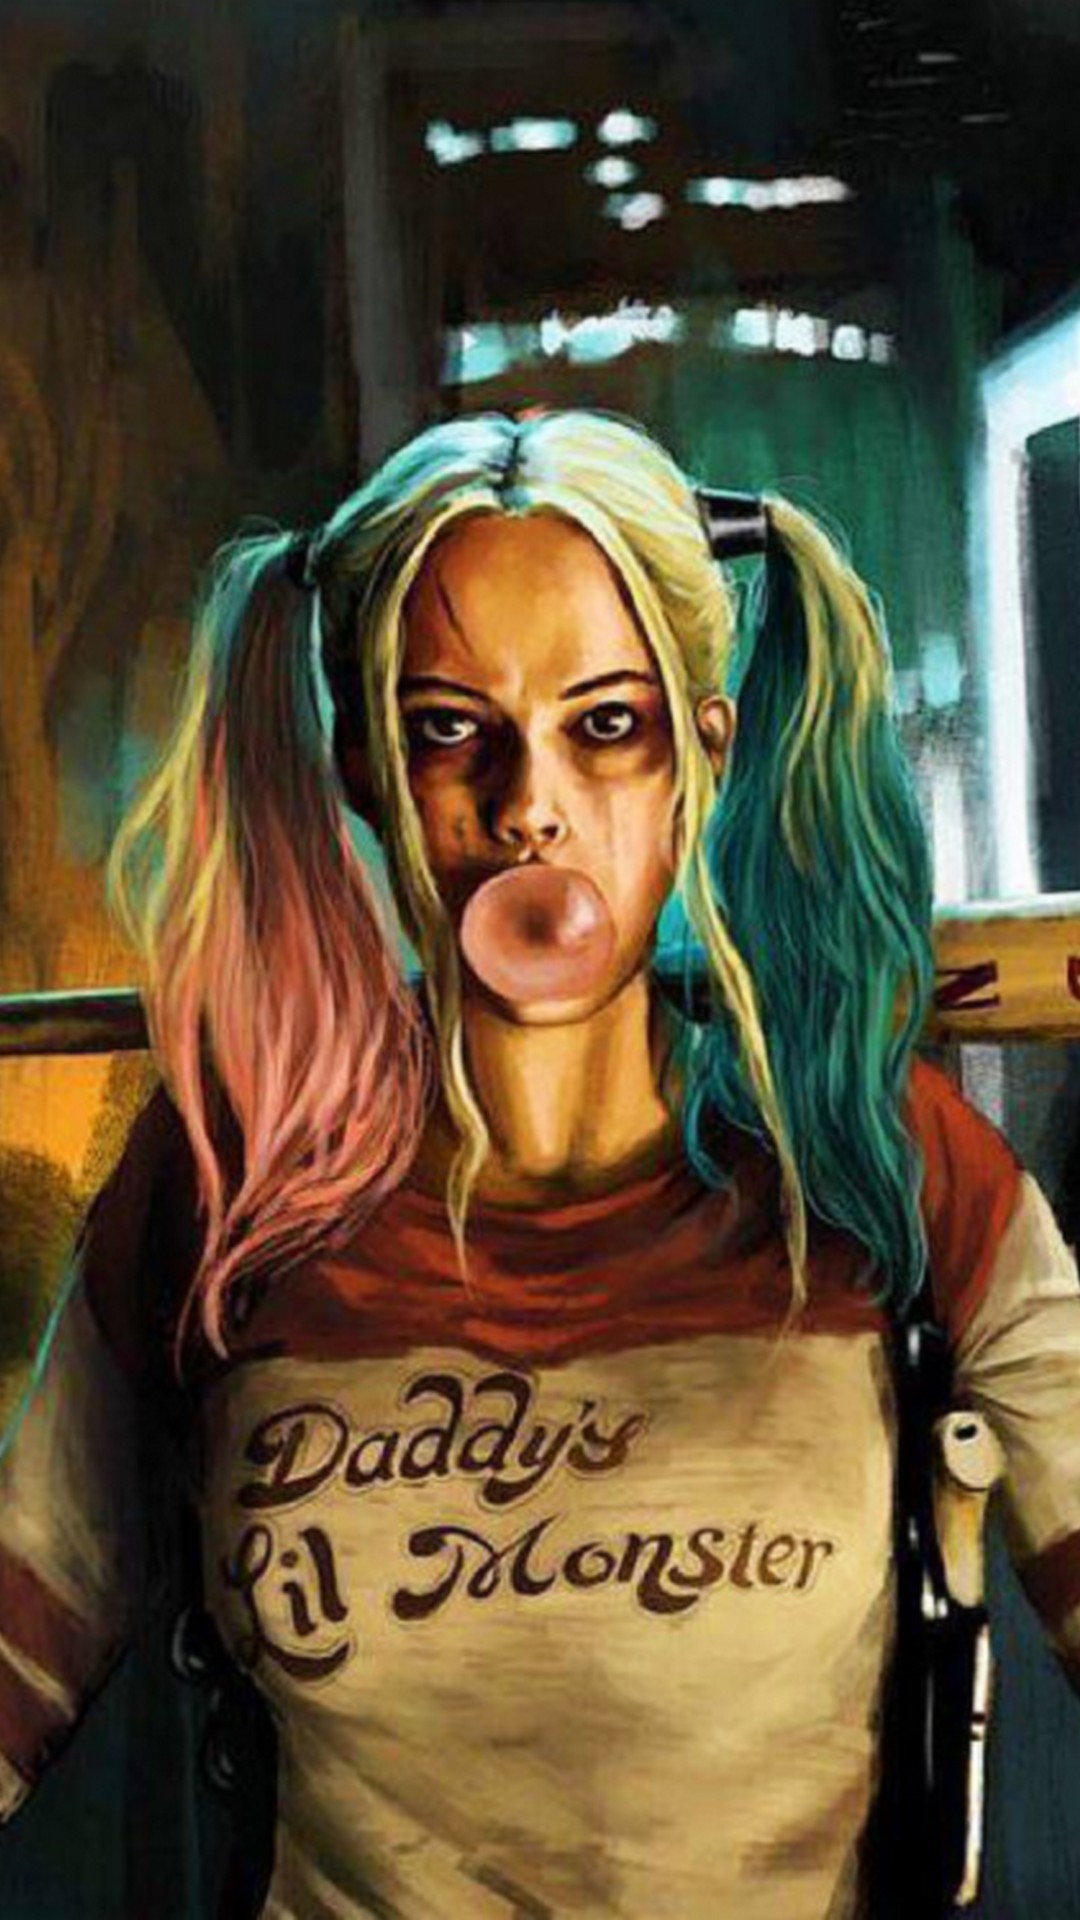 Harley Quinn iPhone Wallpaper with image resolution 1080x1920 pixel. You can make this wallpaper for your iPhone 5, 6, 7, 8, X backgrounds, Mobile Screensaver, or iPad Lock Screen